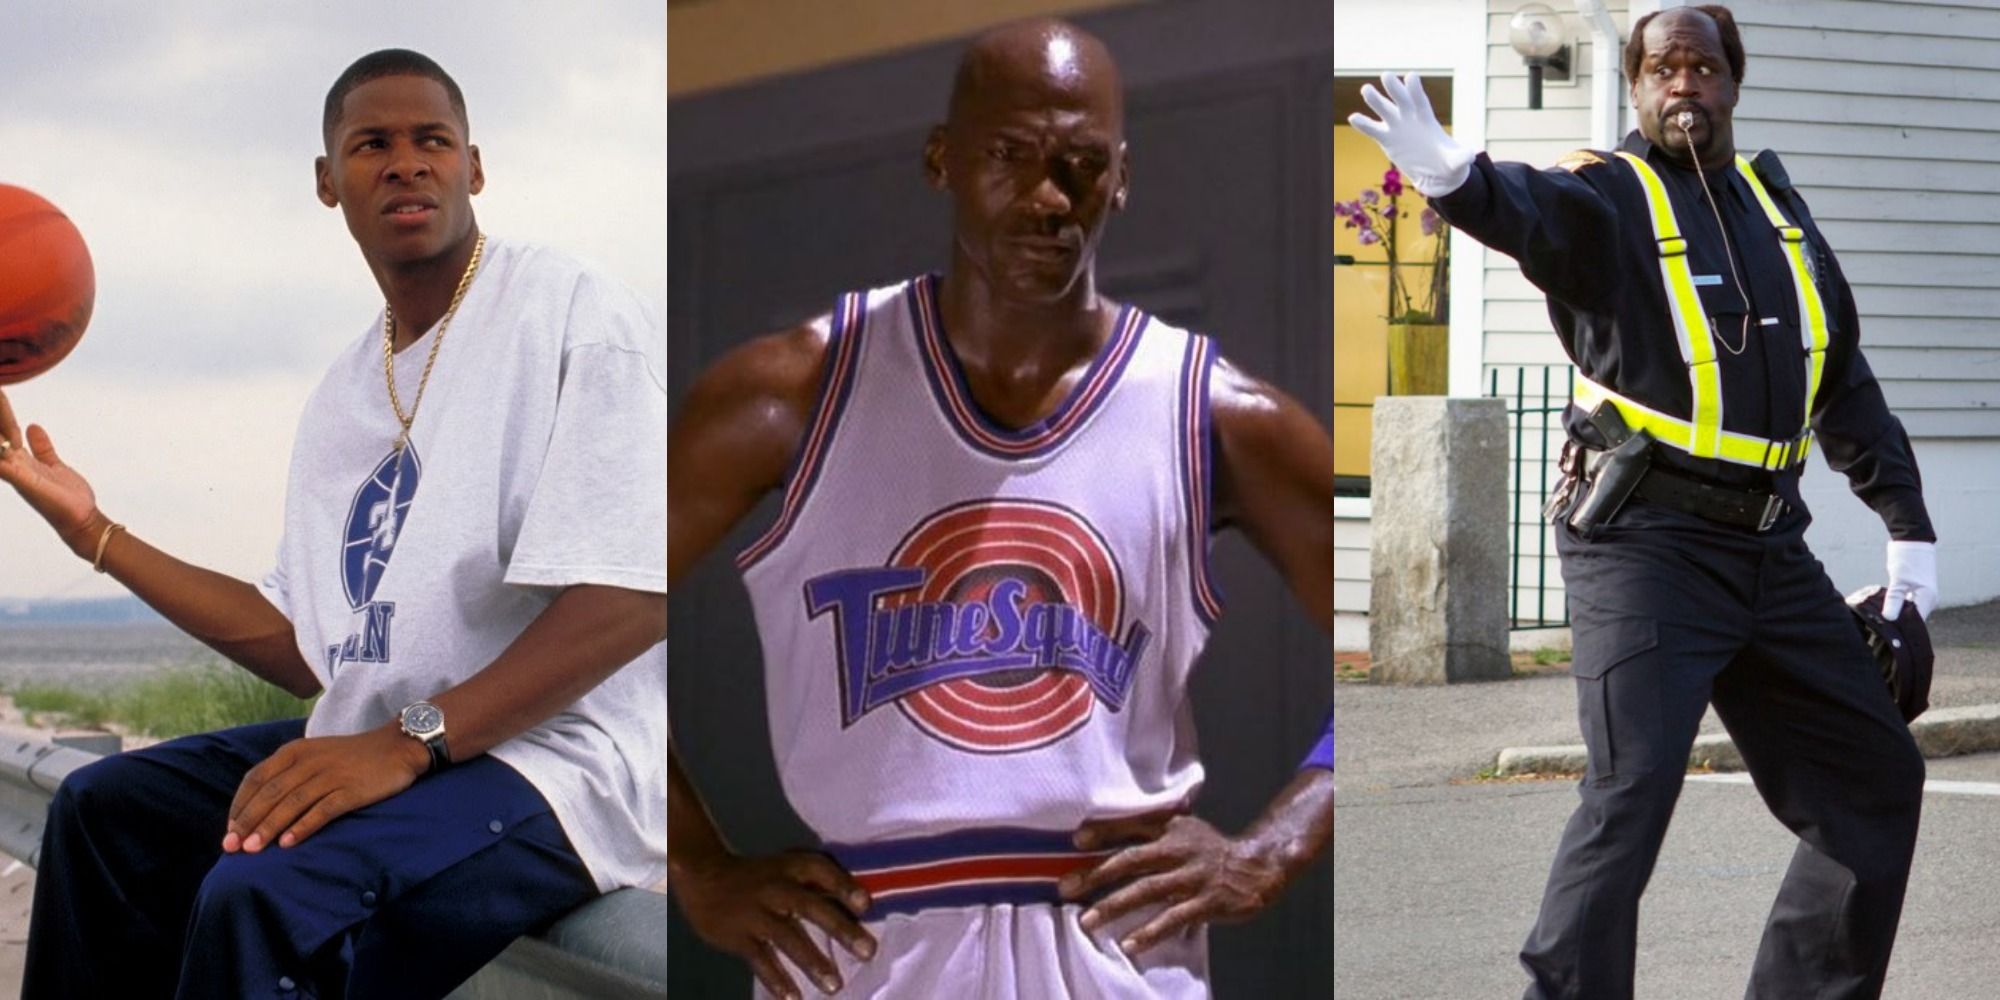 Space Jam 2' Cast Features These NBA Players on Court With LeBron